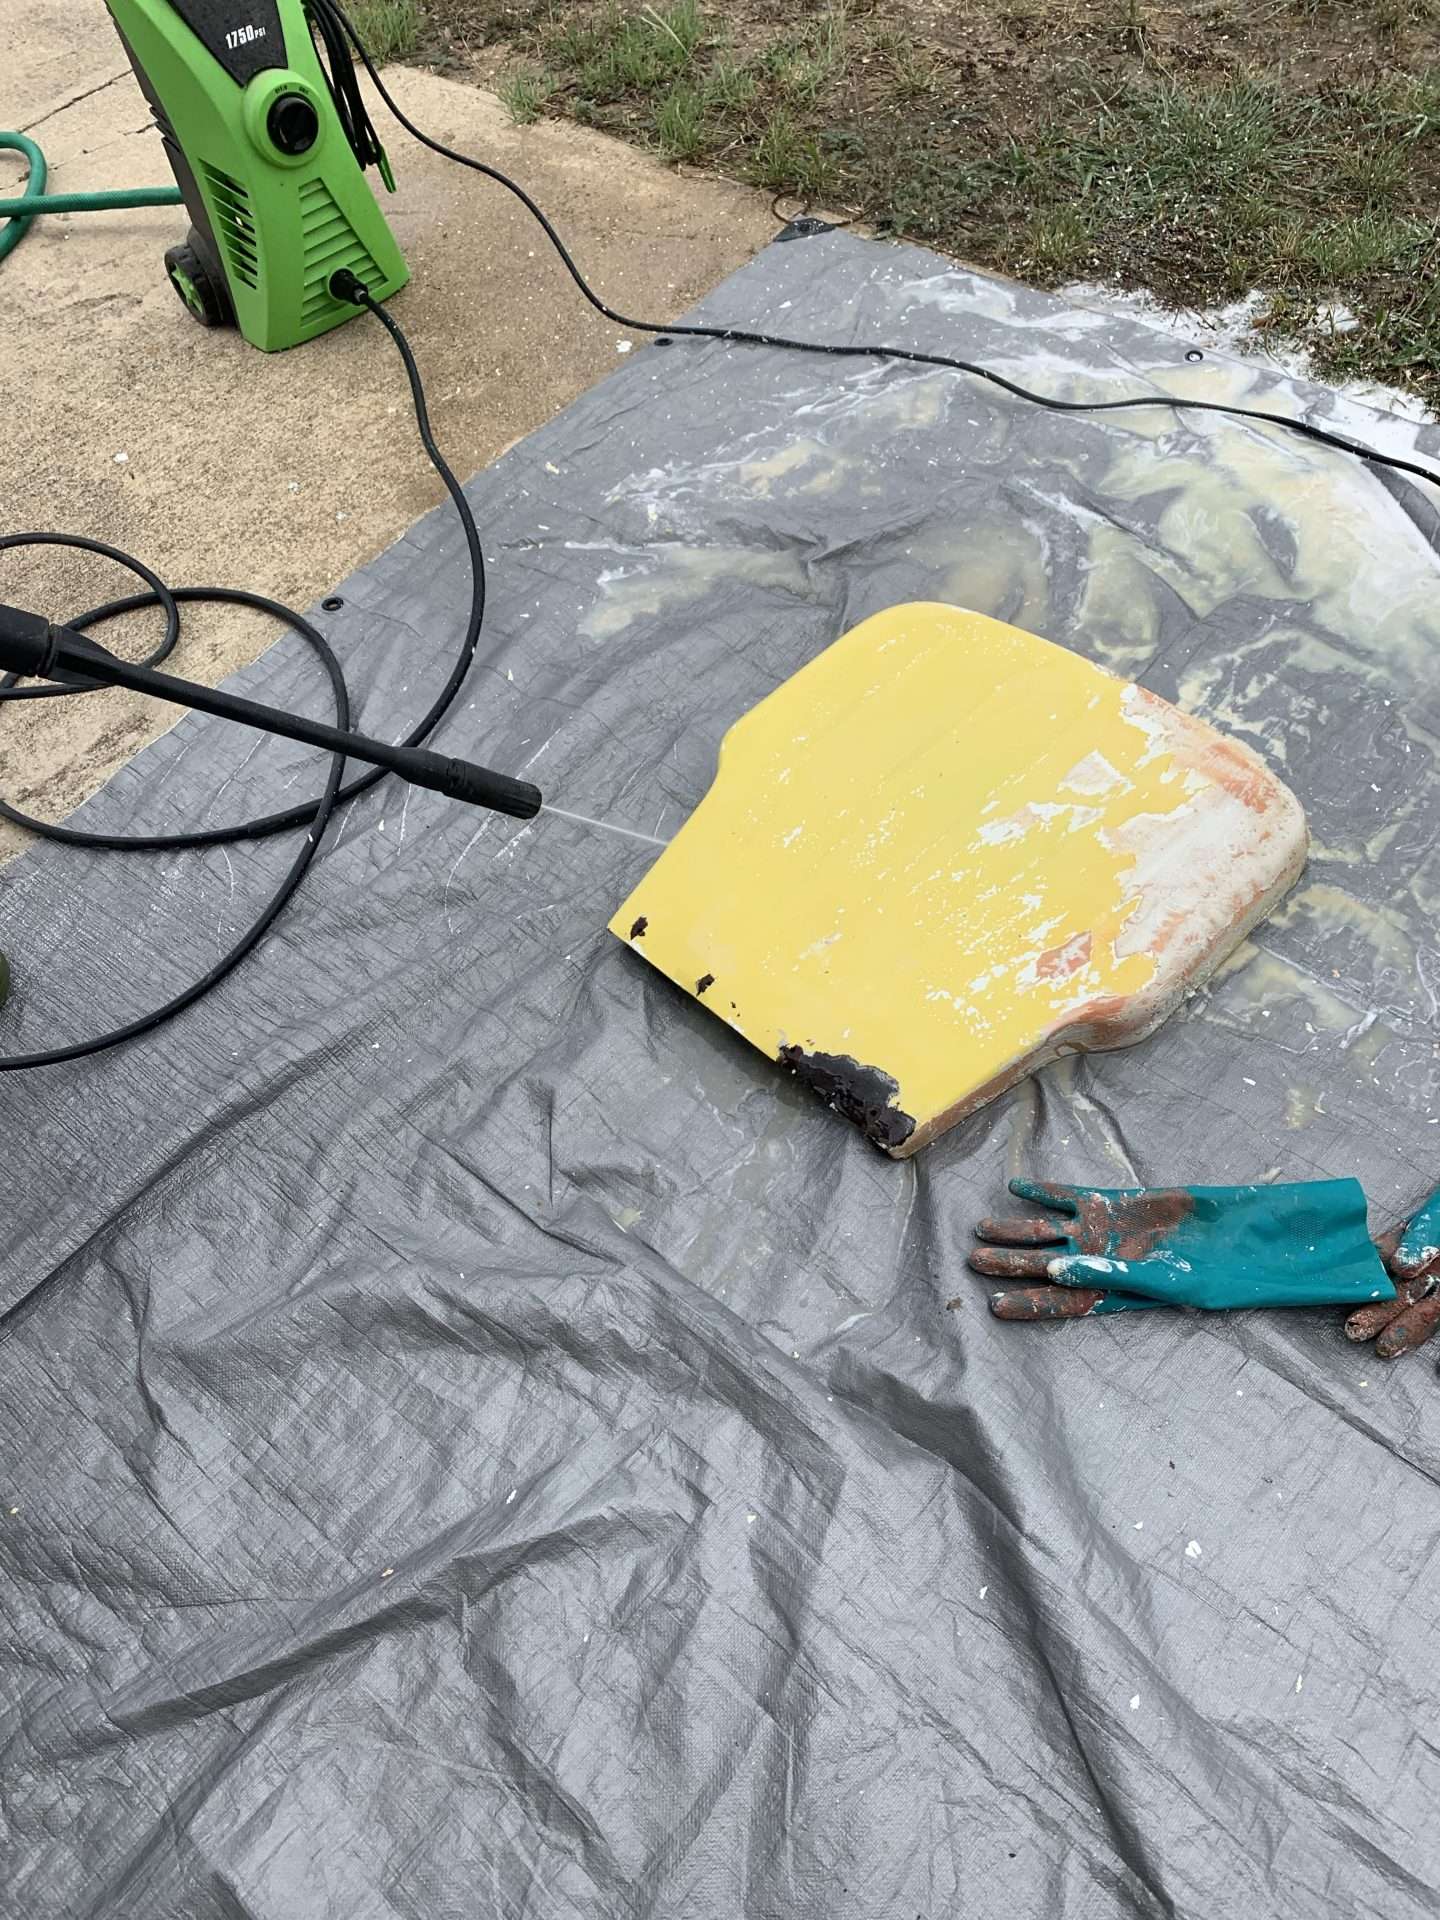 Using a pressure washer to blast the paint stripper and layers of paint off of a vintage metal glider.